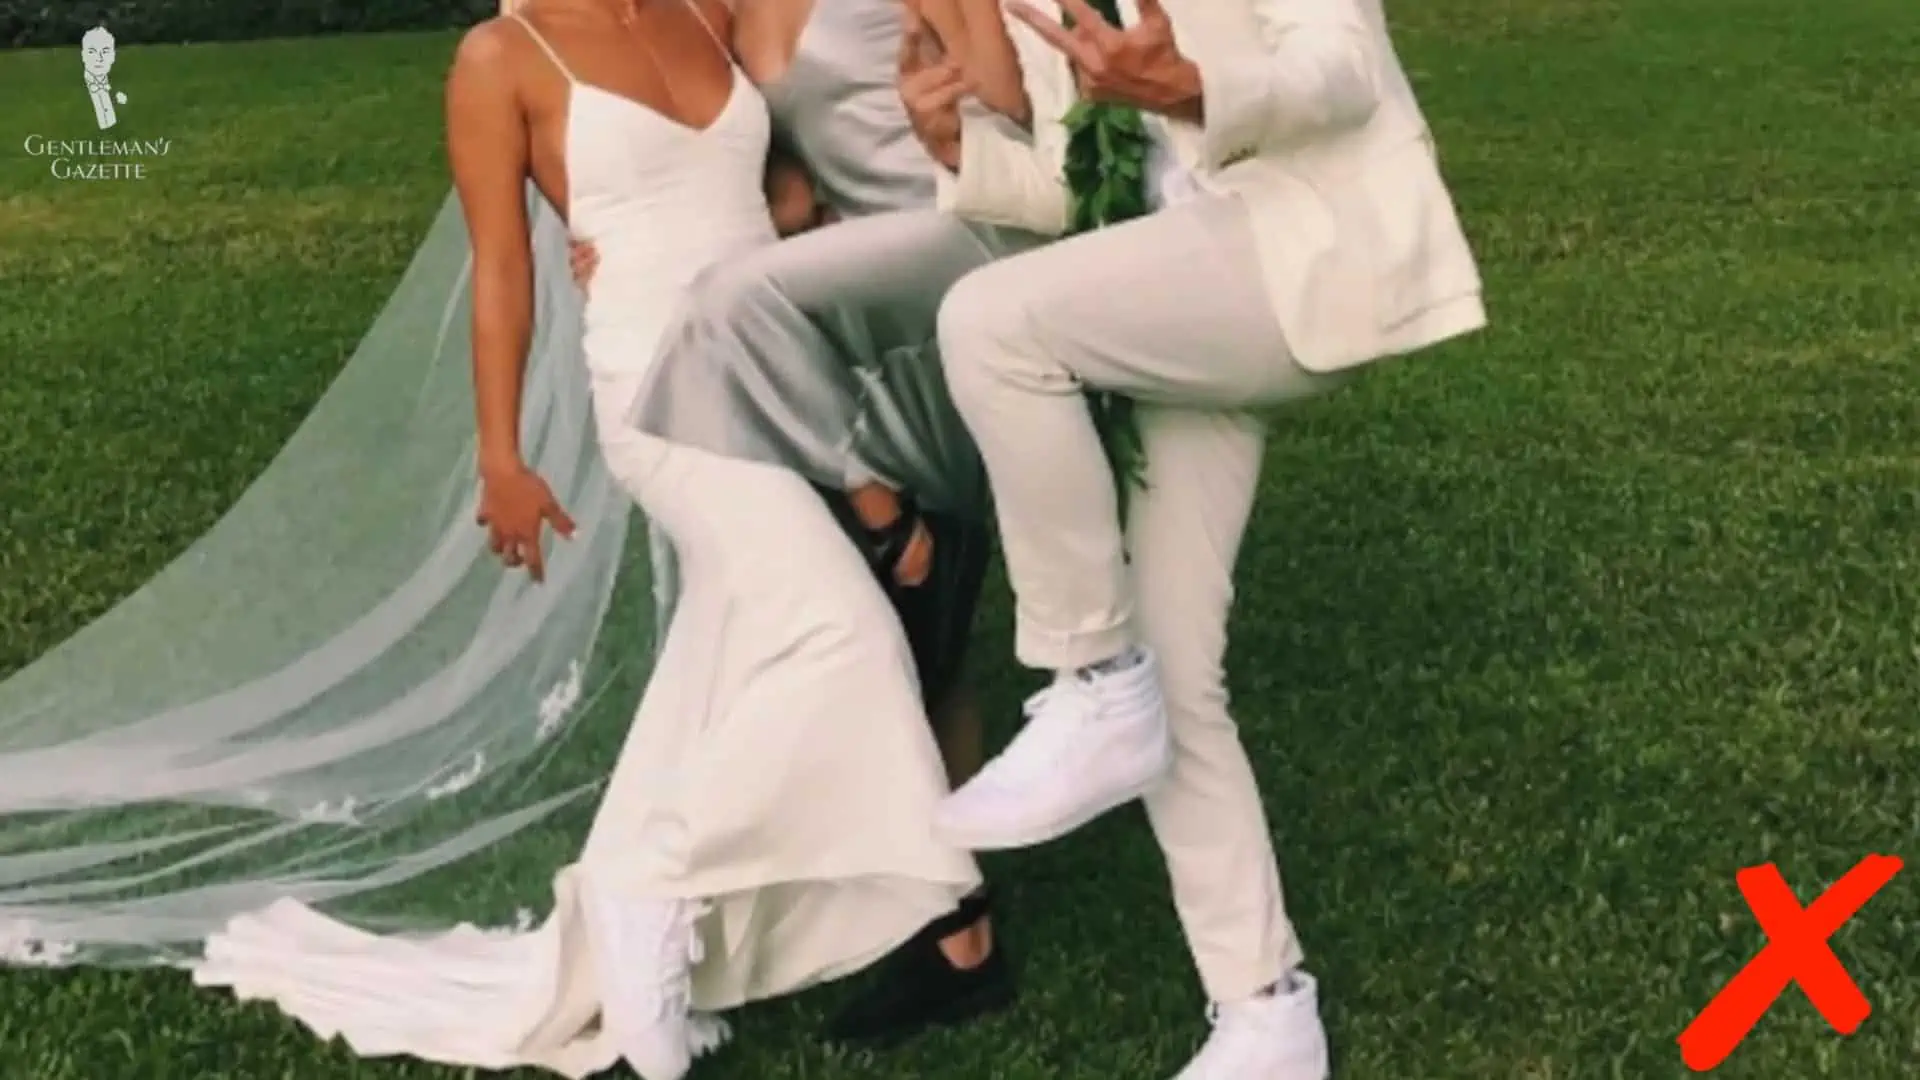 A pair of sneakers is definitely inappropriate in a wedding 